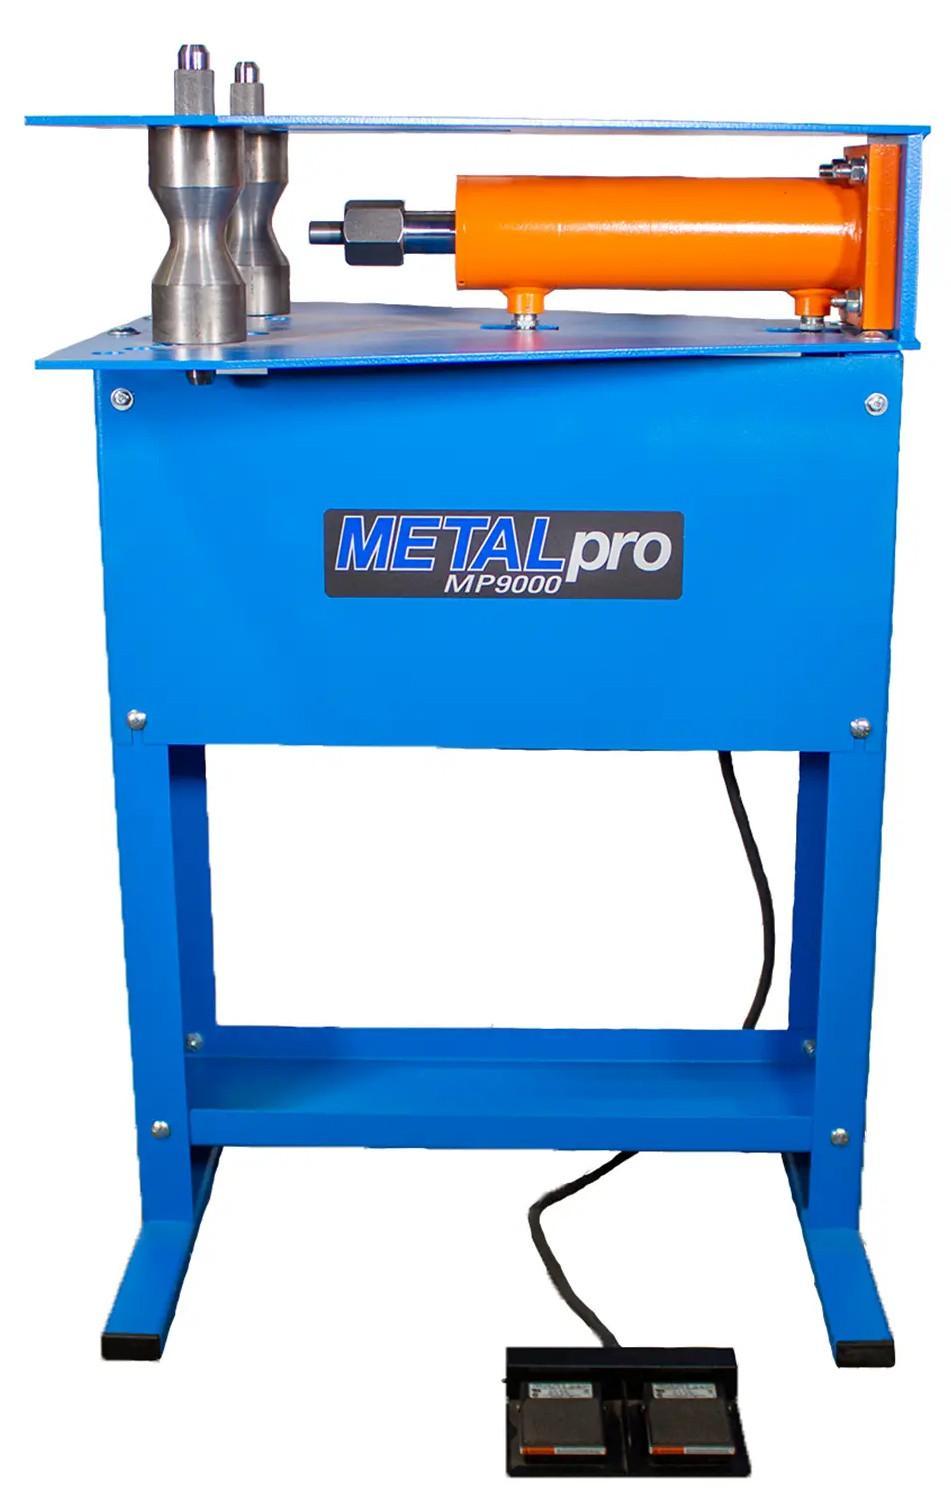 12 TON PIPE & TUBE BENDER - 90 DEGREE BENDER (ROUND PIPE AND TUBE BETWEEN 1/2-2), 3/4 HP, 110V, WIEIGHT 310 LBS, DIMS: 27 X 26 X 43